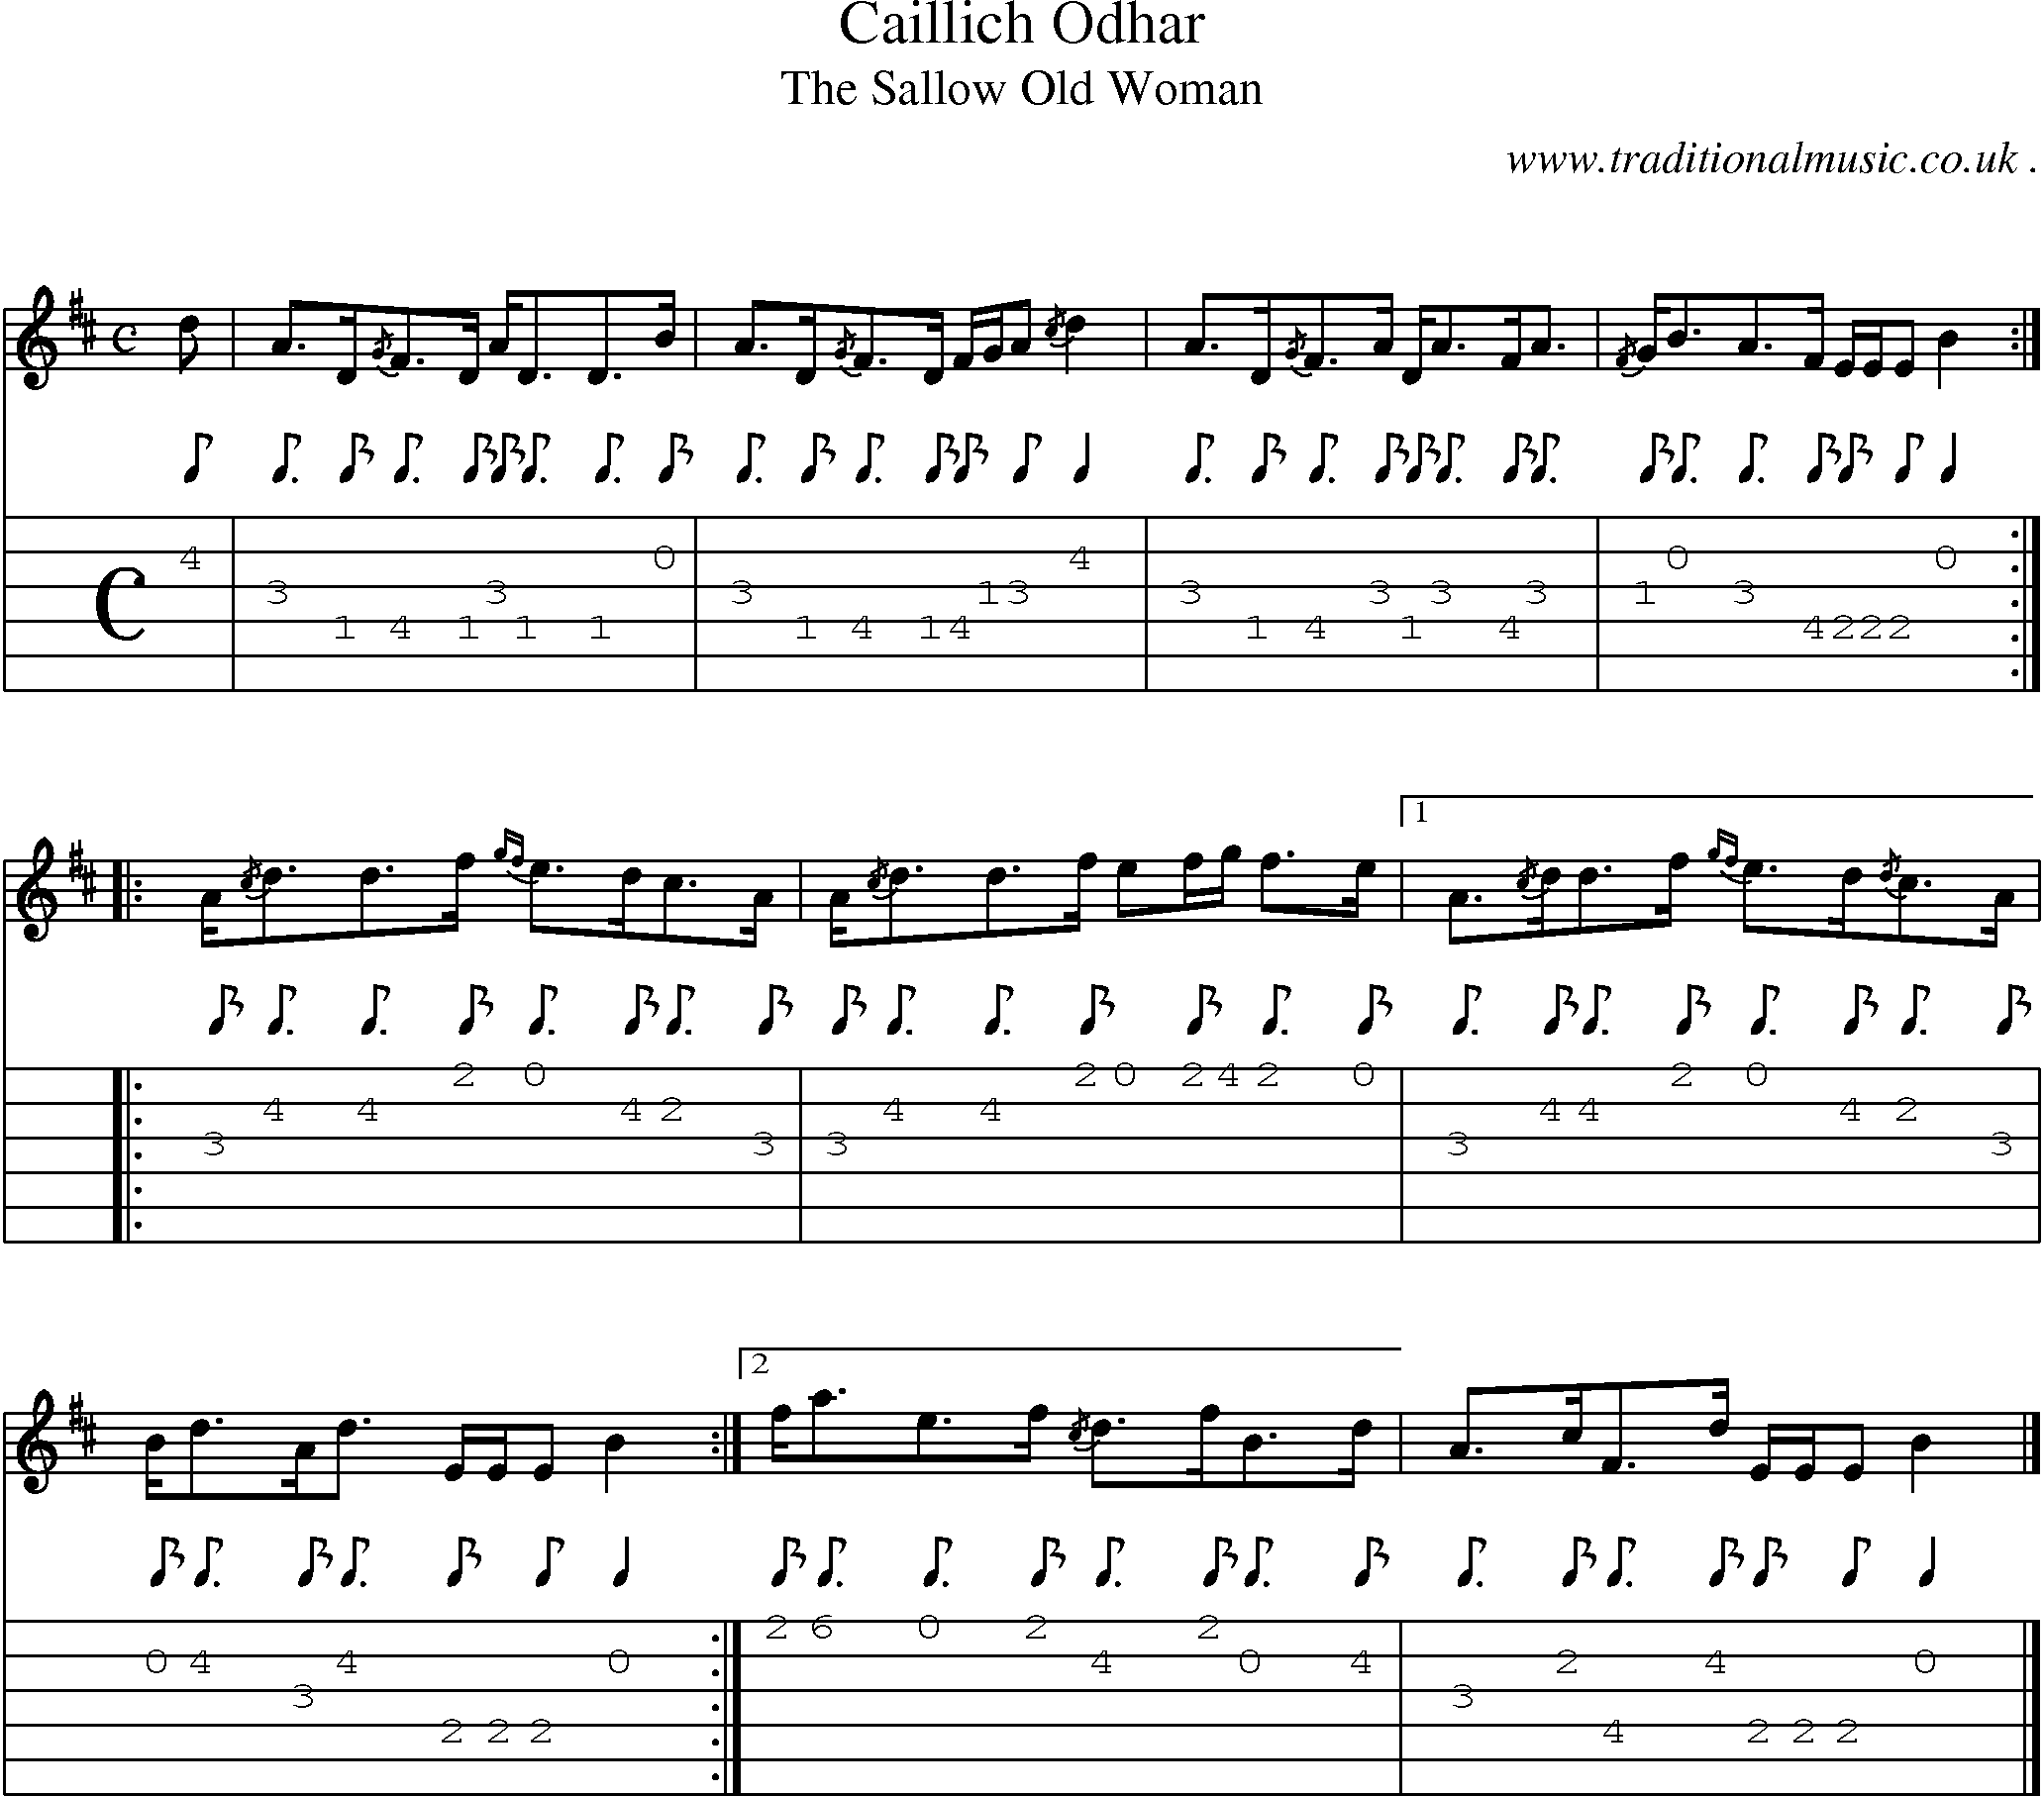 Sheet-music  score, Chords and Guitar Tabs for Caillich Odhar